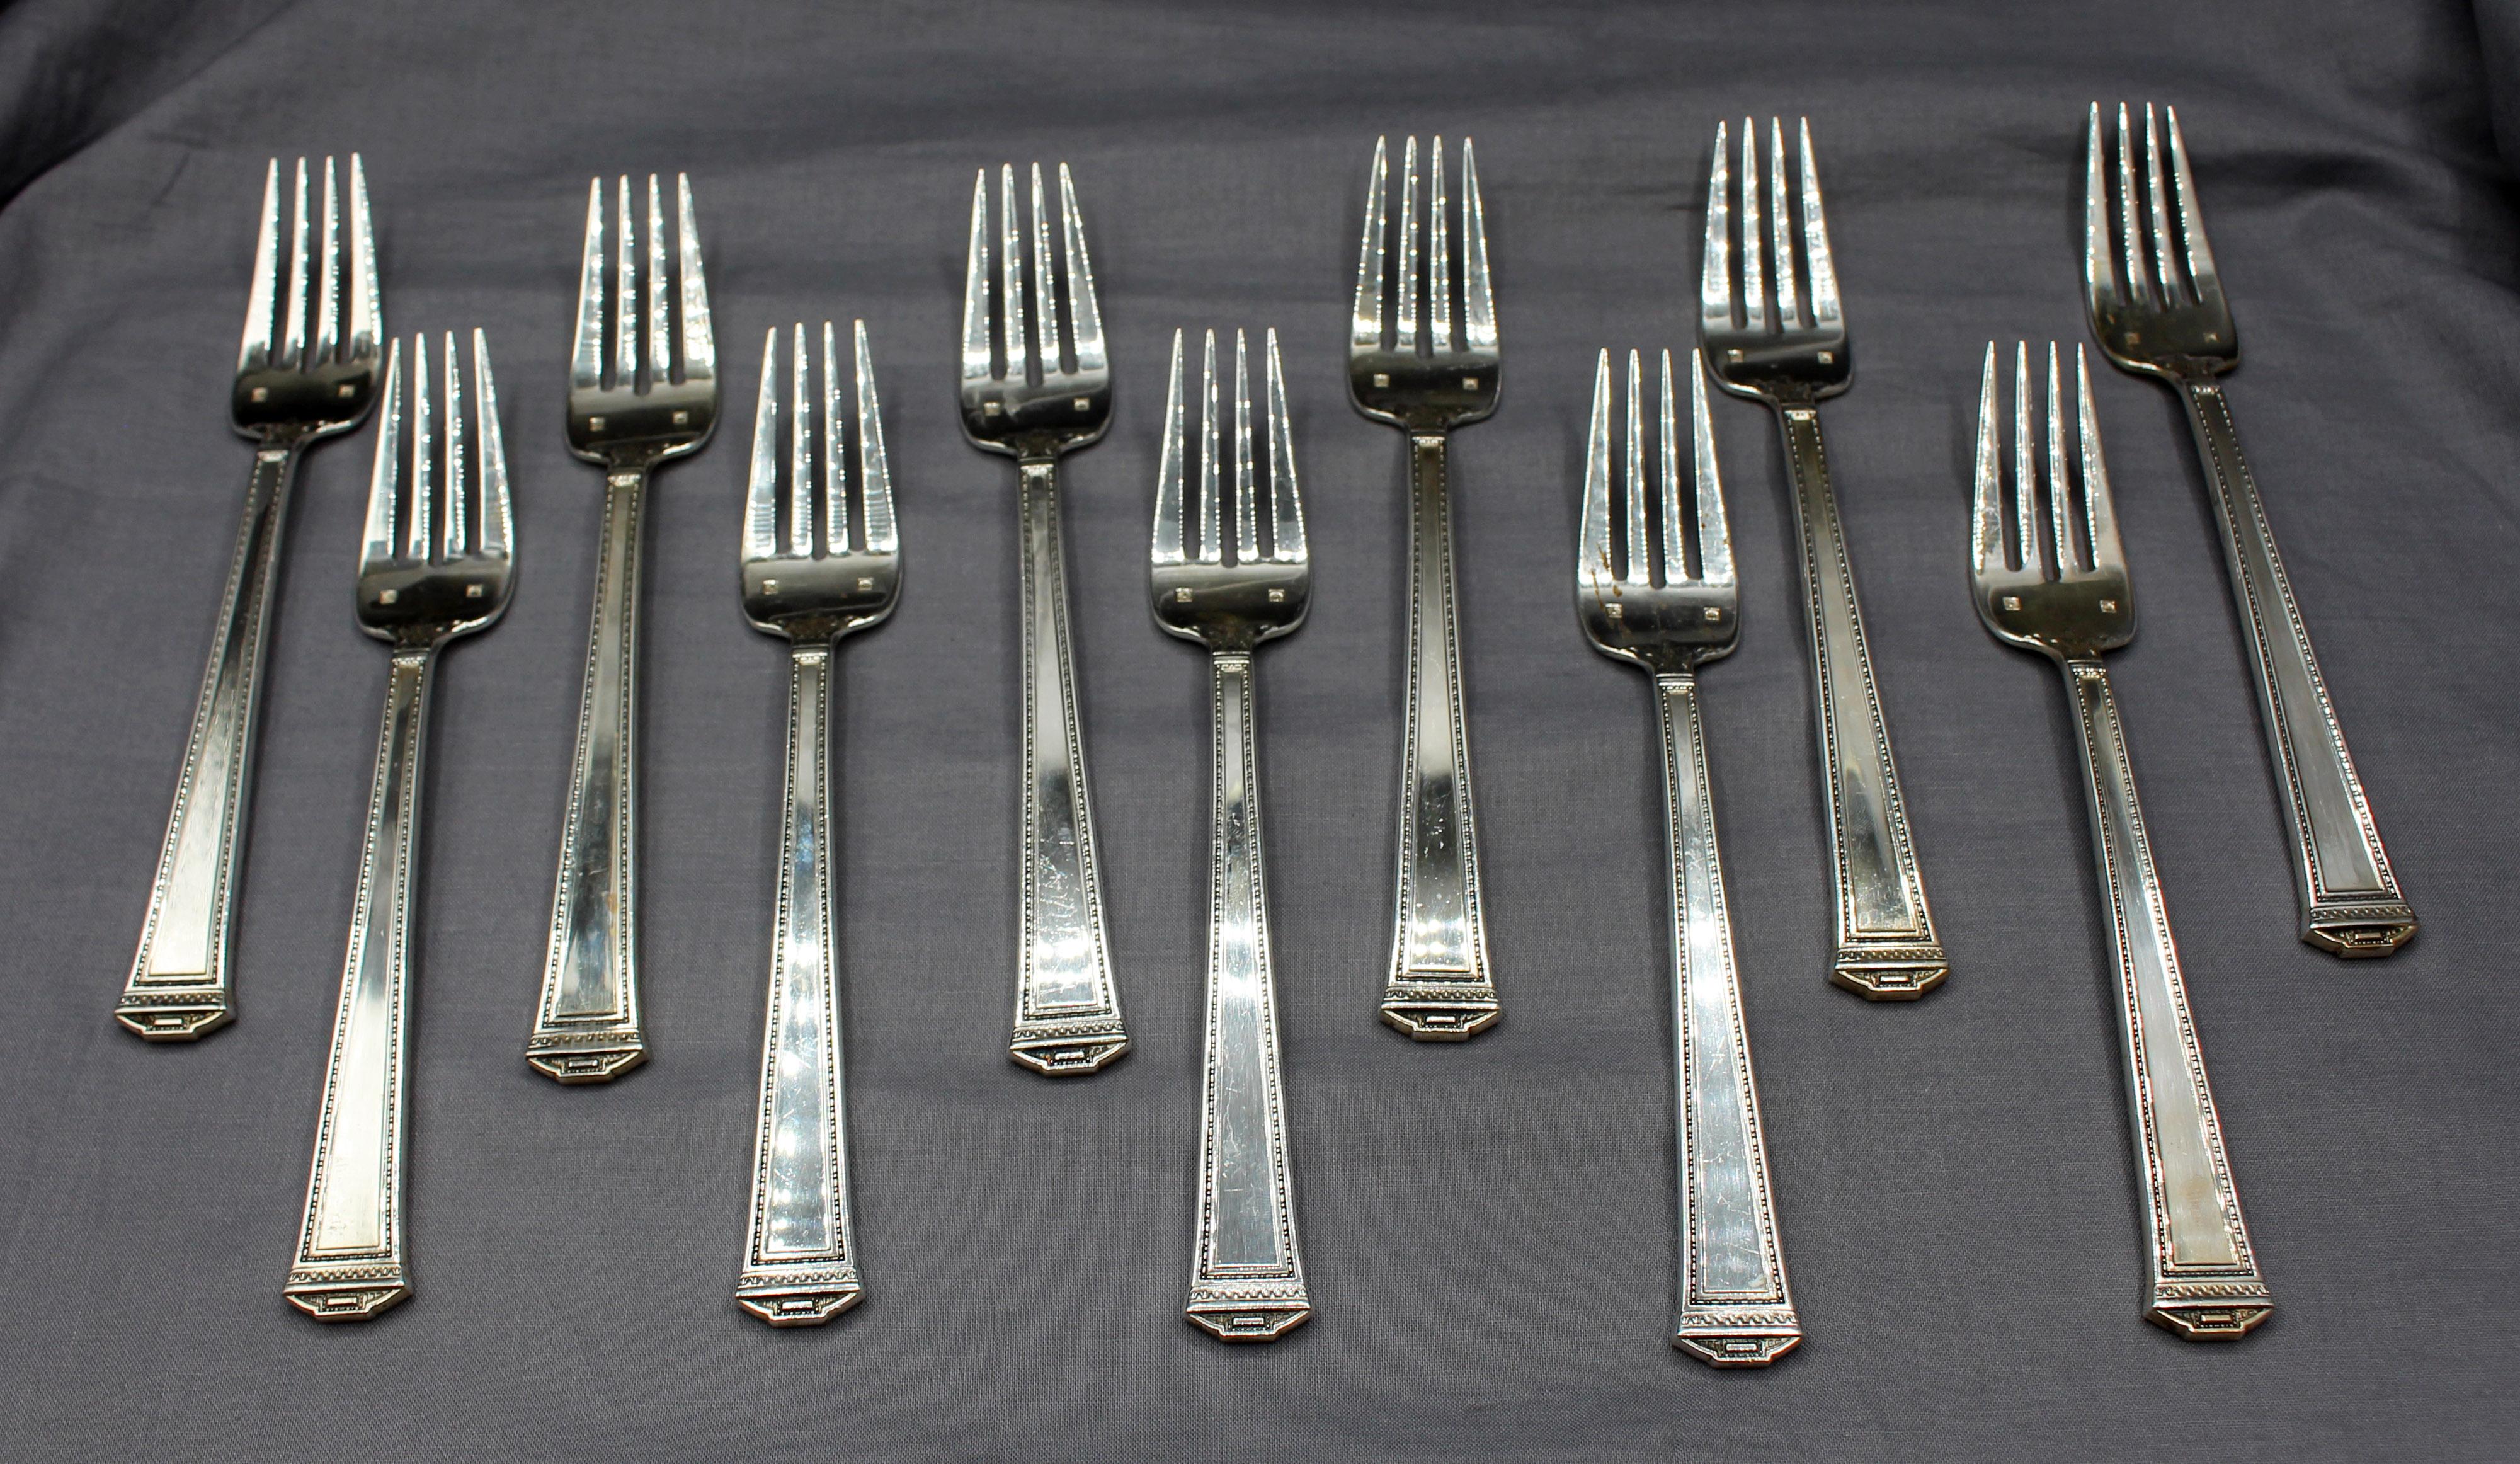 2001-2009 57 pc. set of sterling silver flatware, Pantheon pattern by Tuttle, American. Includes: 12 dinner knives (9.75